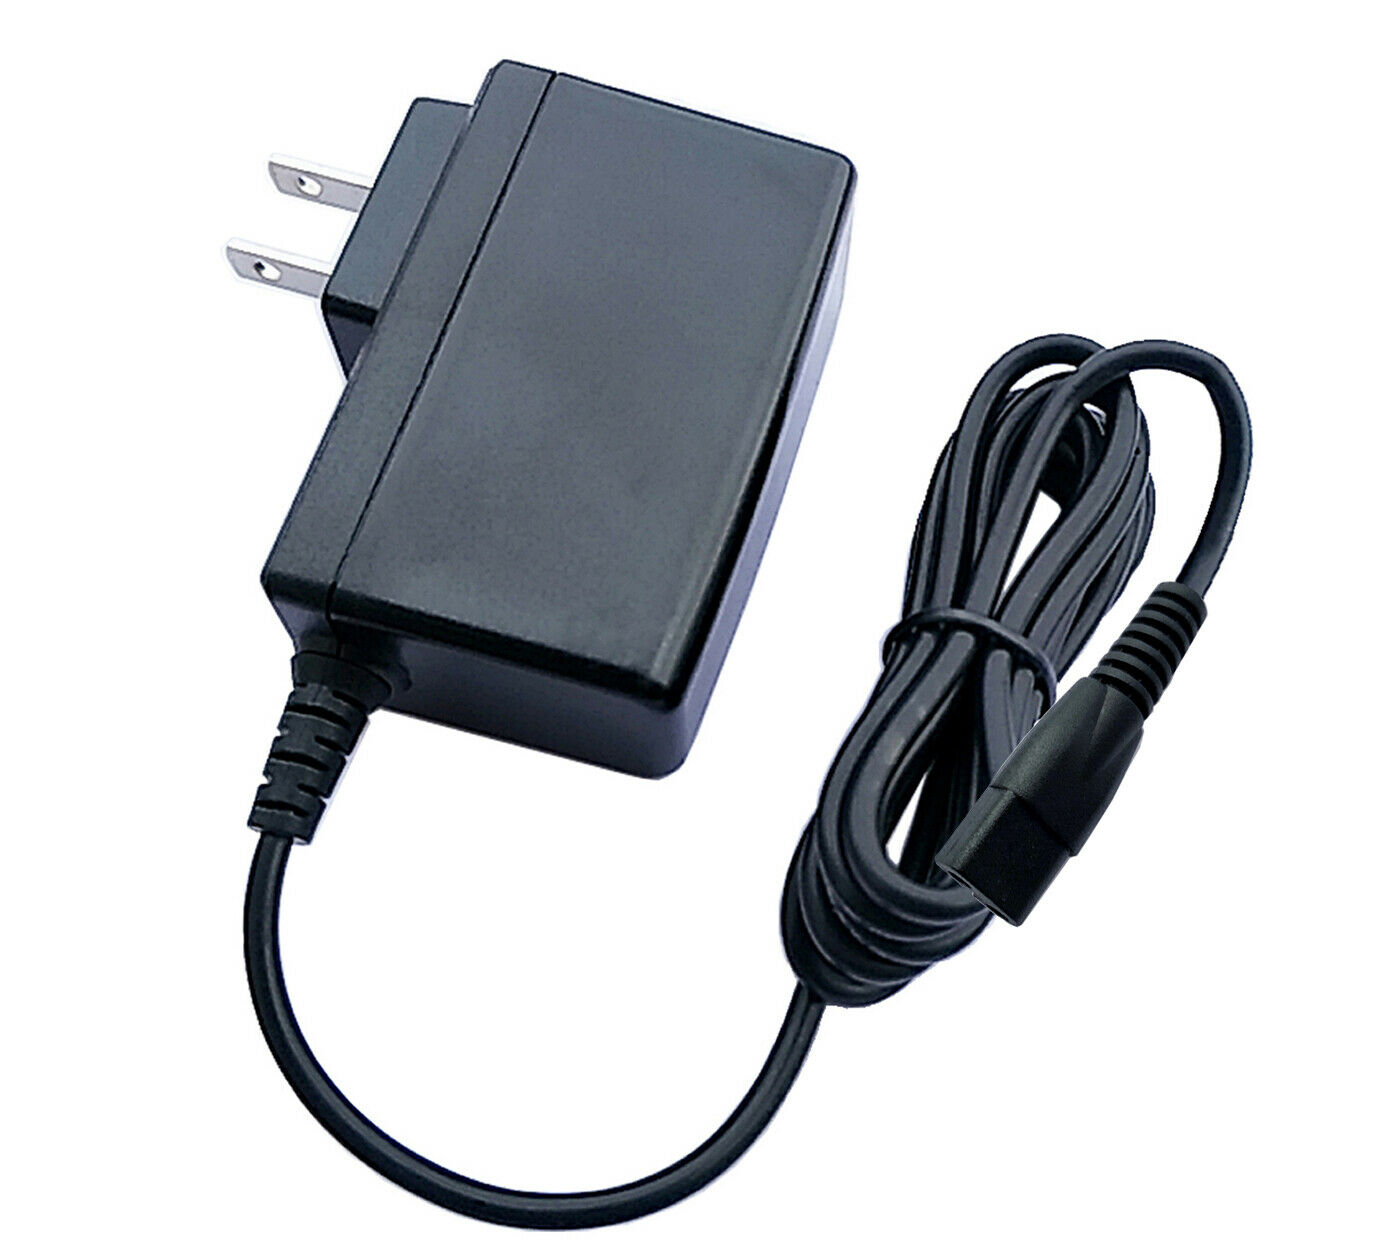 Globe AC/DC Adapter For HON-KWANG D9300-04 D930004 Power Supply Battery Charger Technical Specifications: 1 AC input vo - Click Image to Close